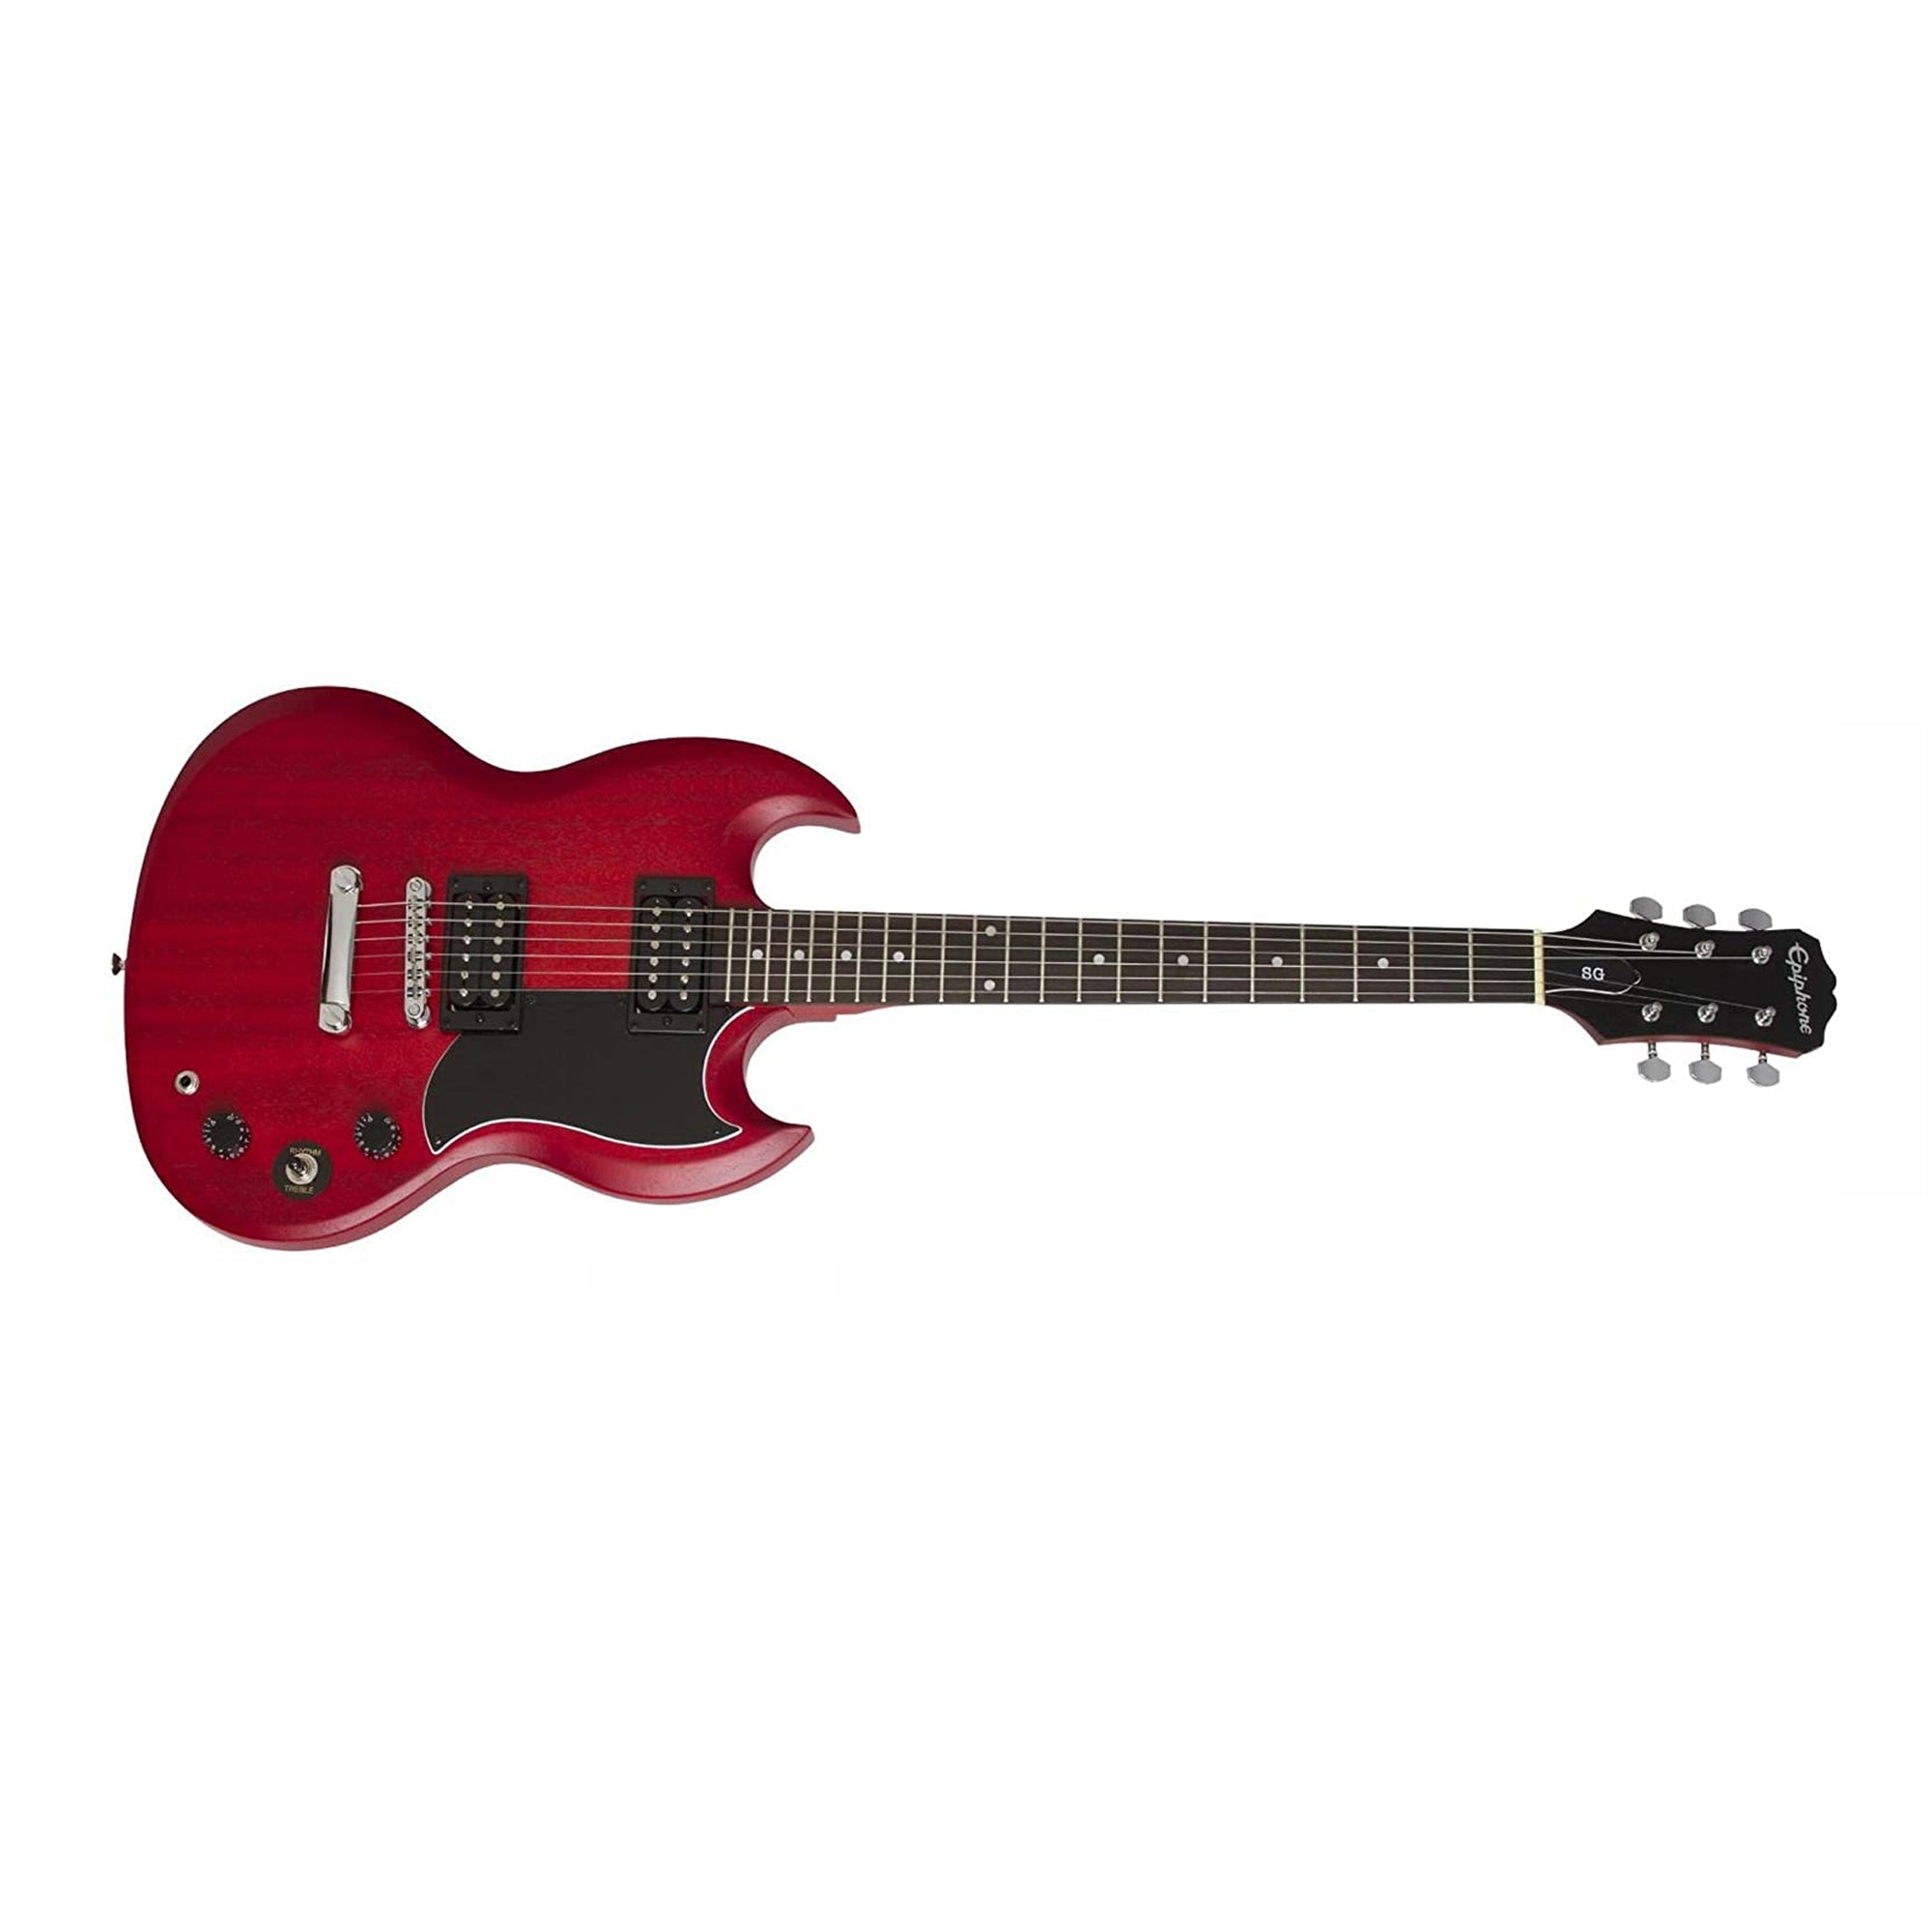 Epiphone EGSVCHVCH1 SG Special VE Cherry Electric Guitar